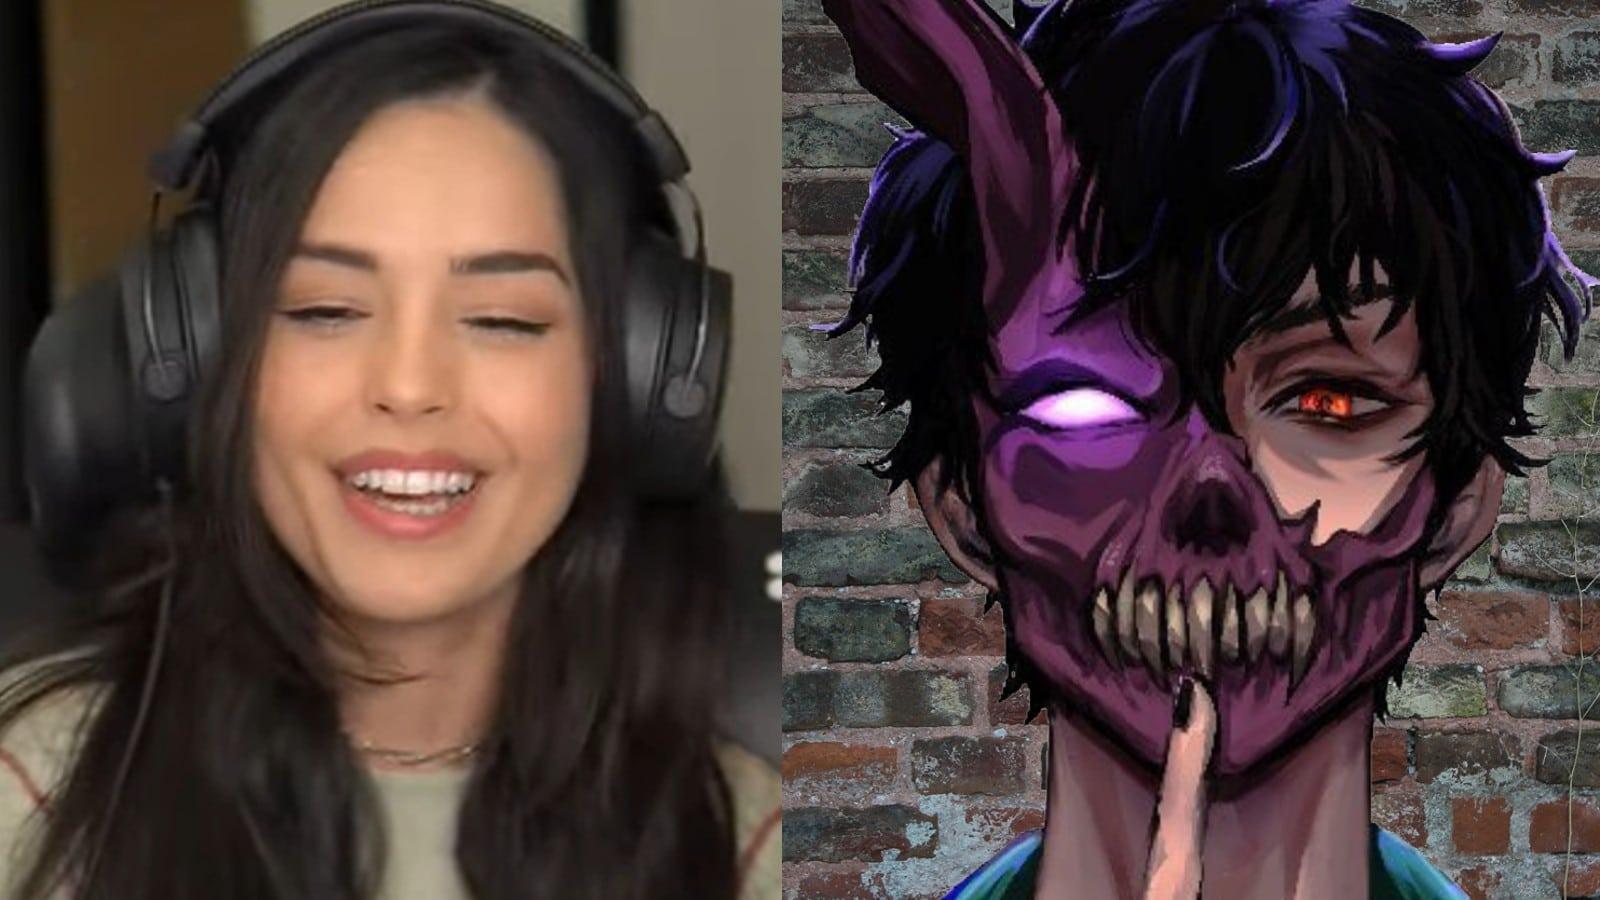 Valkyrae streaming on YouTube with Corpse Husband avatar